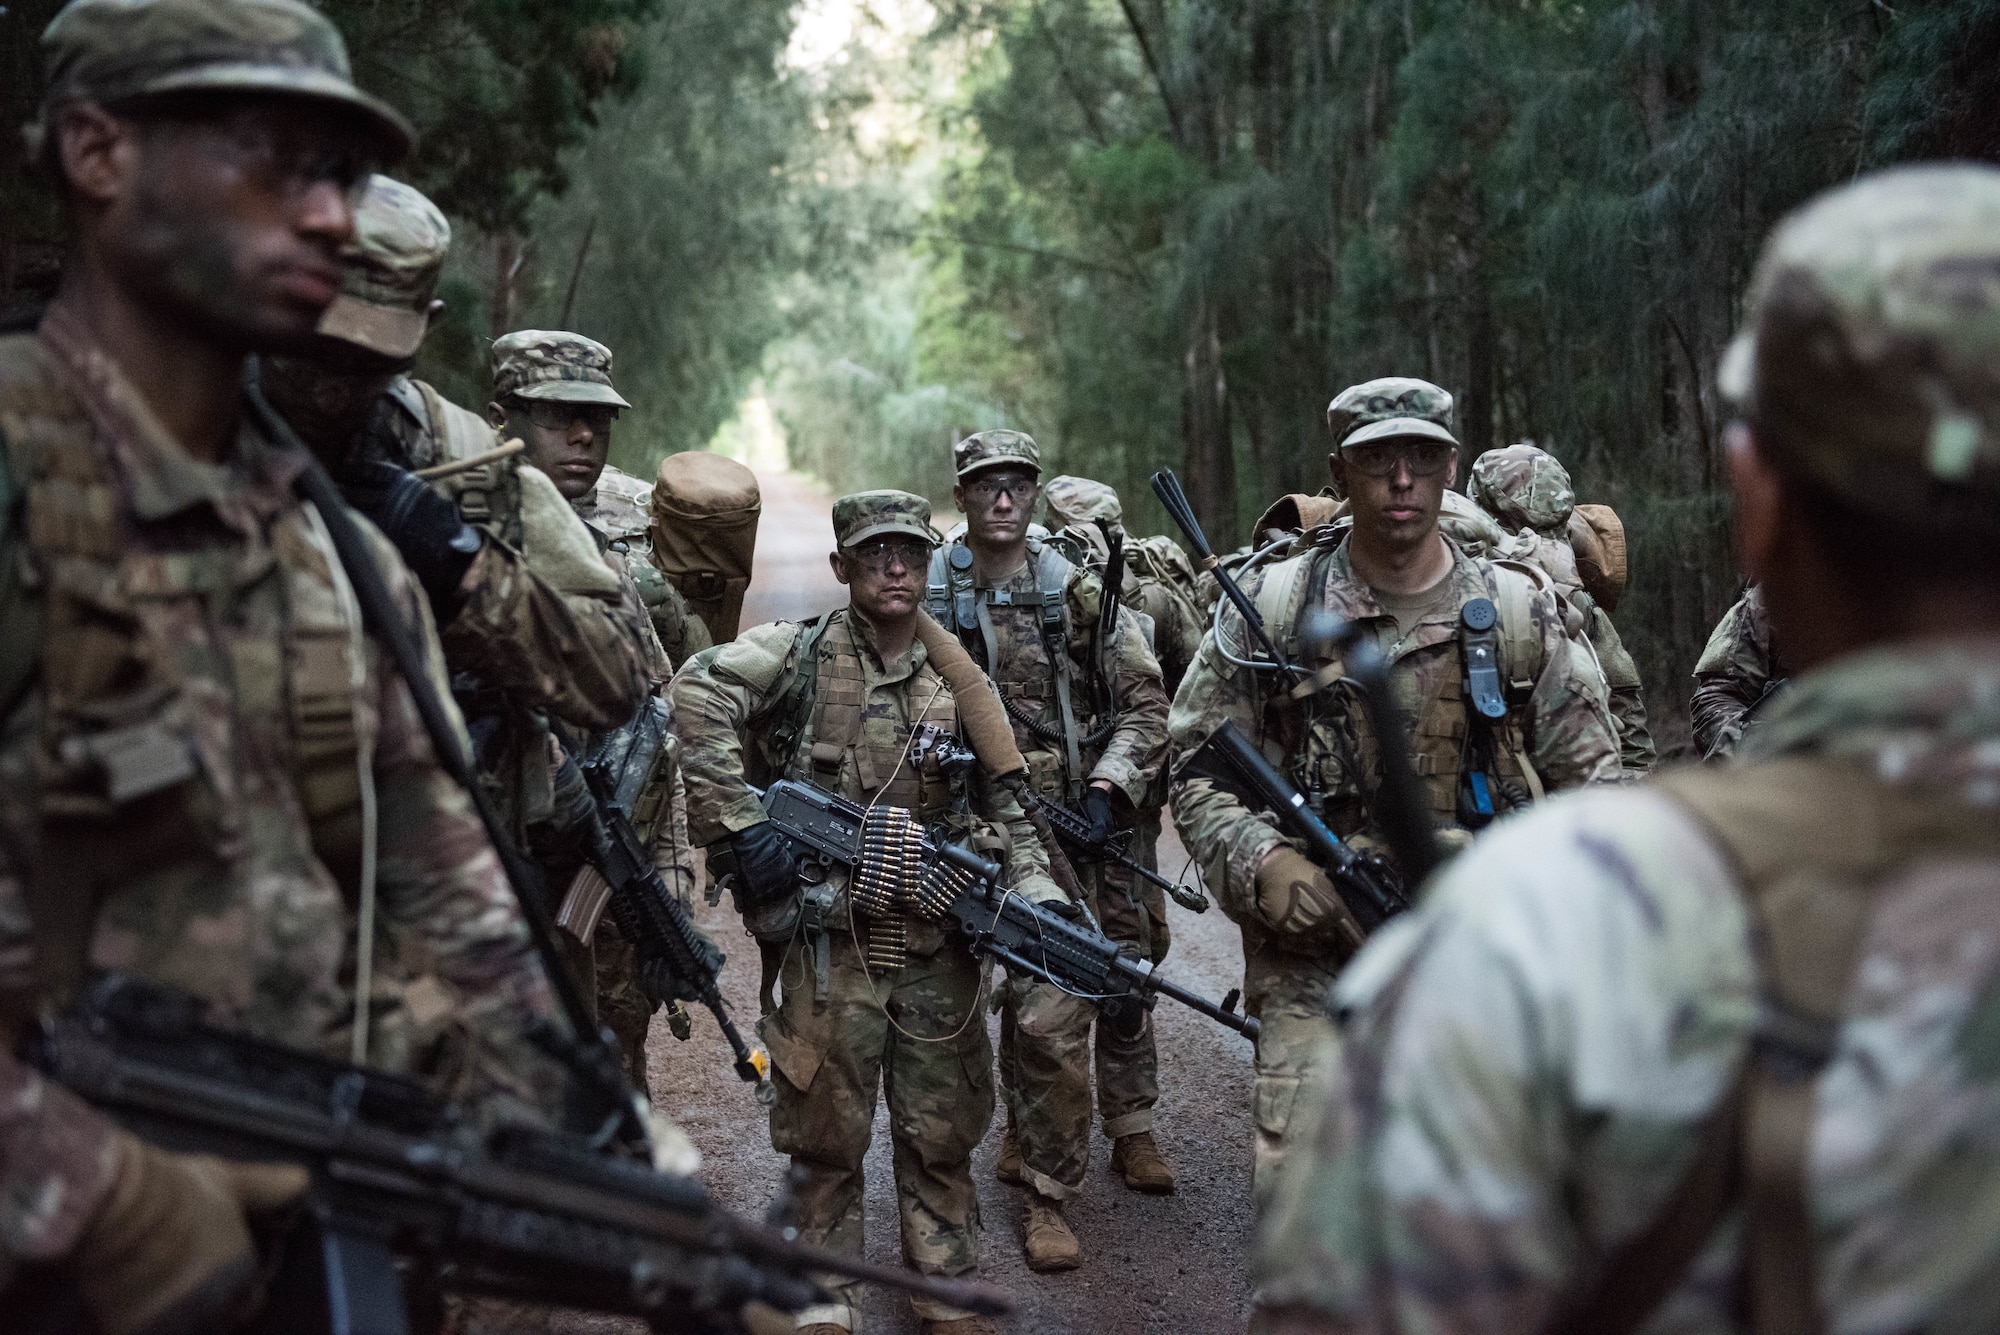 Ranger Assessment Course students are instructed on the prime locations for an ambush during training near Schofield Barracks, Oahu, Hawaii, May 23, 2019. Twenty-three Airmen from across the Air Force recently converged on a training camp for a three-week Ranger Assessment Course May 12-31, 2019. (U.S. Air Force photo by Staff Sgt. Hailey Haux)